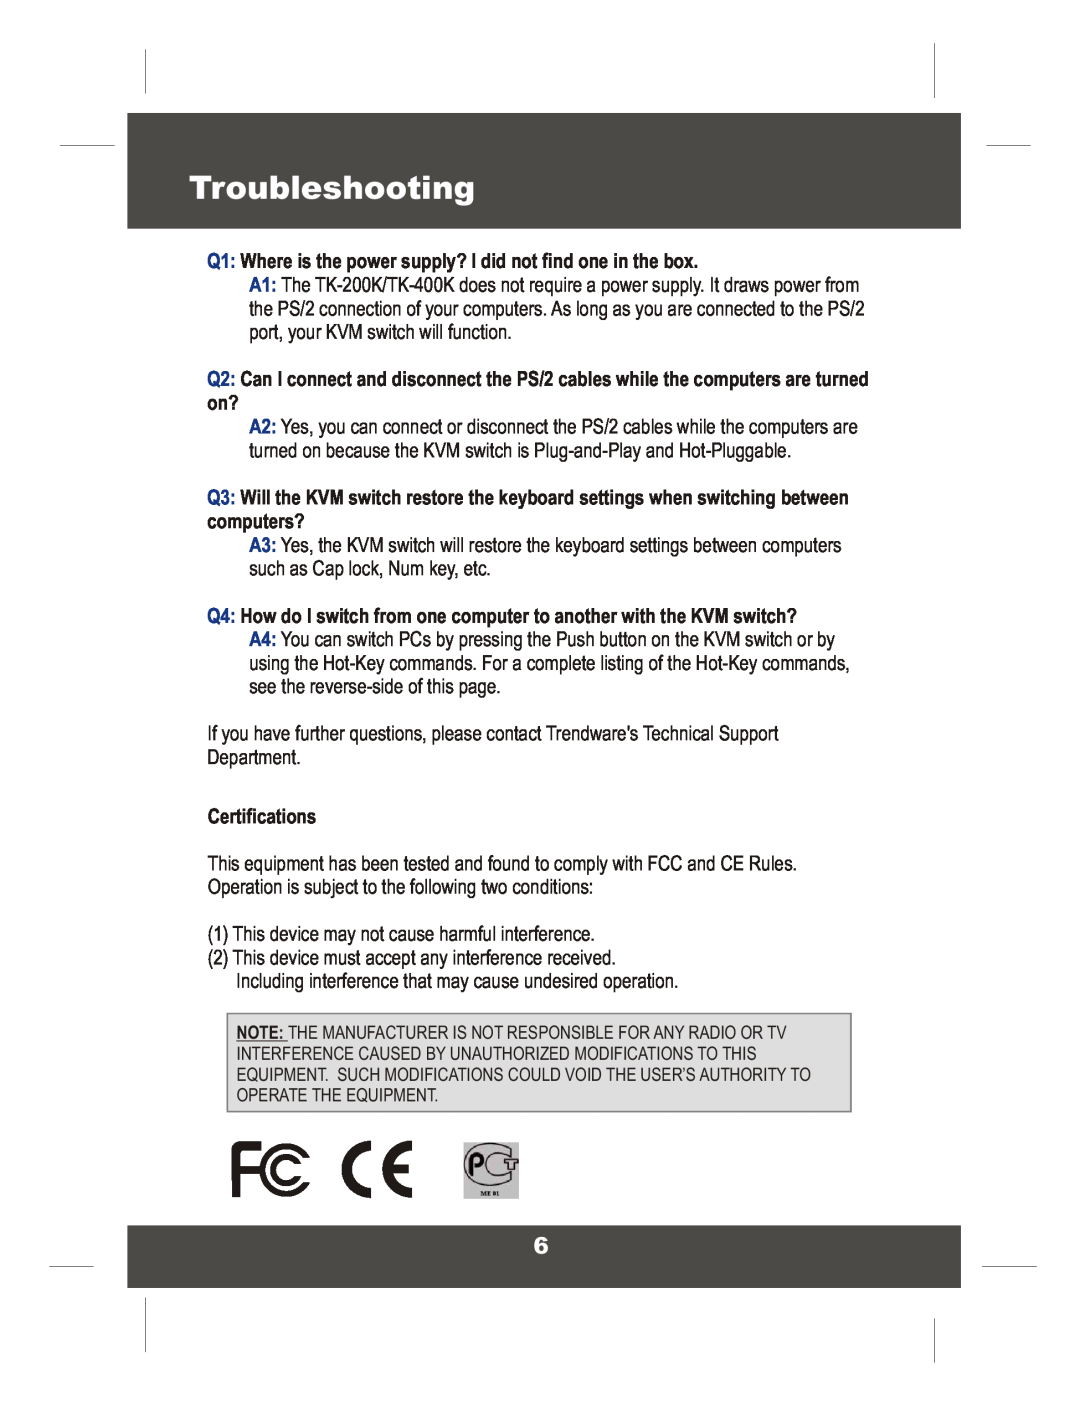 TRENDnet TK400K manual Troubleshooting, Q1 Where is the power supply? I did not find one in the box, Certifications 